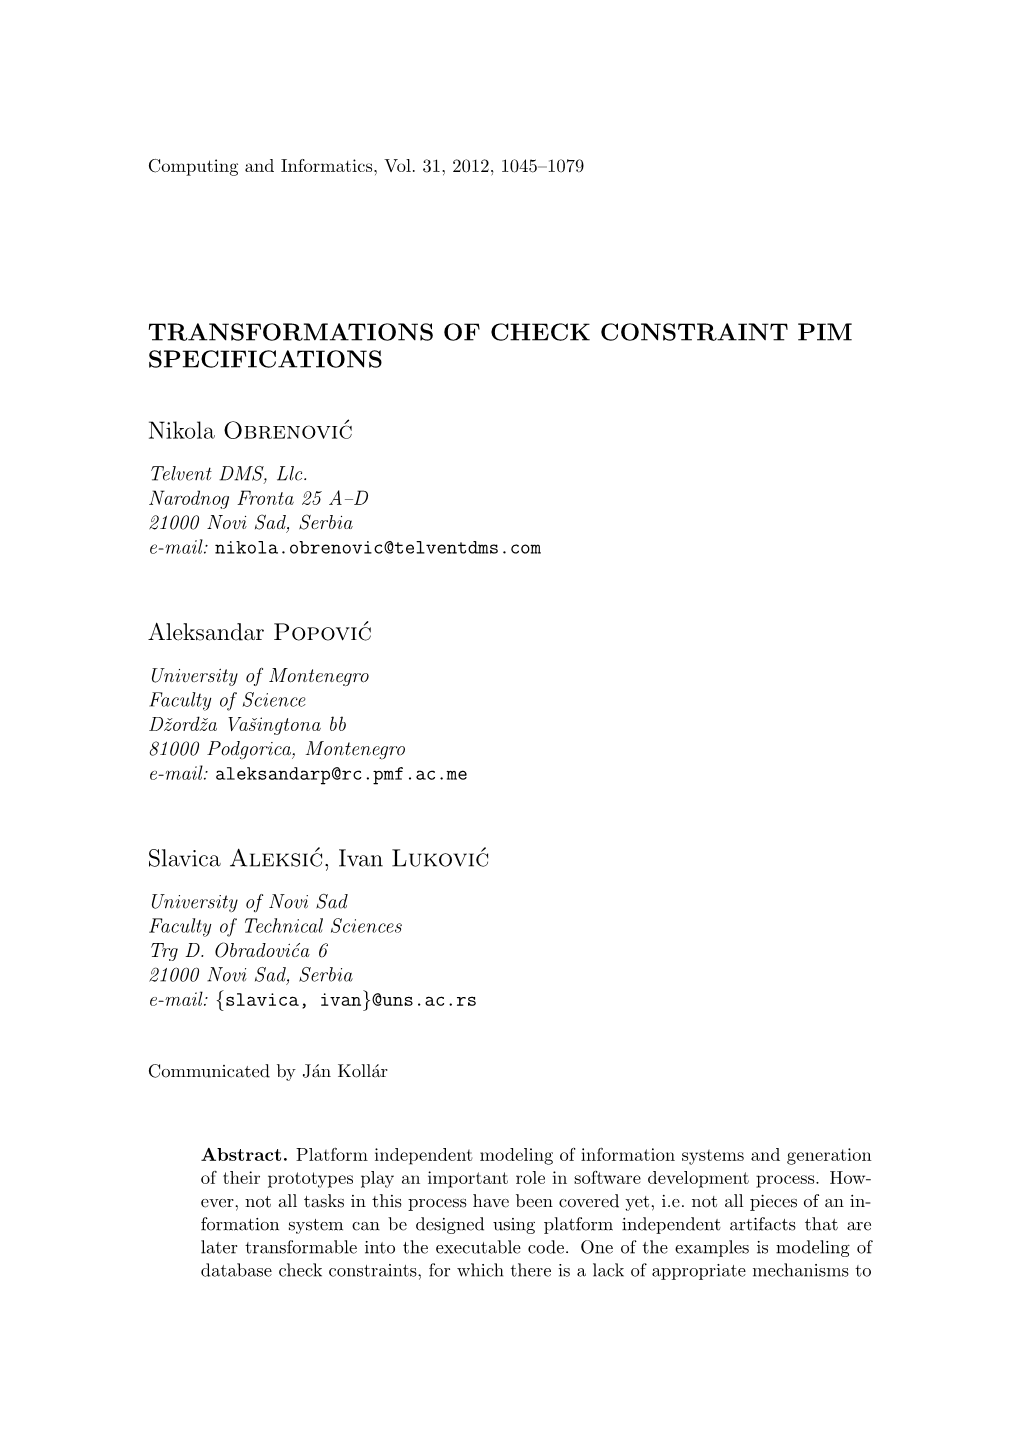 Transformations of Check Constraint Pim Specifications